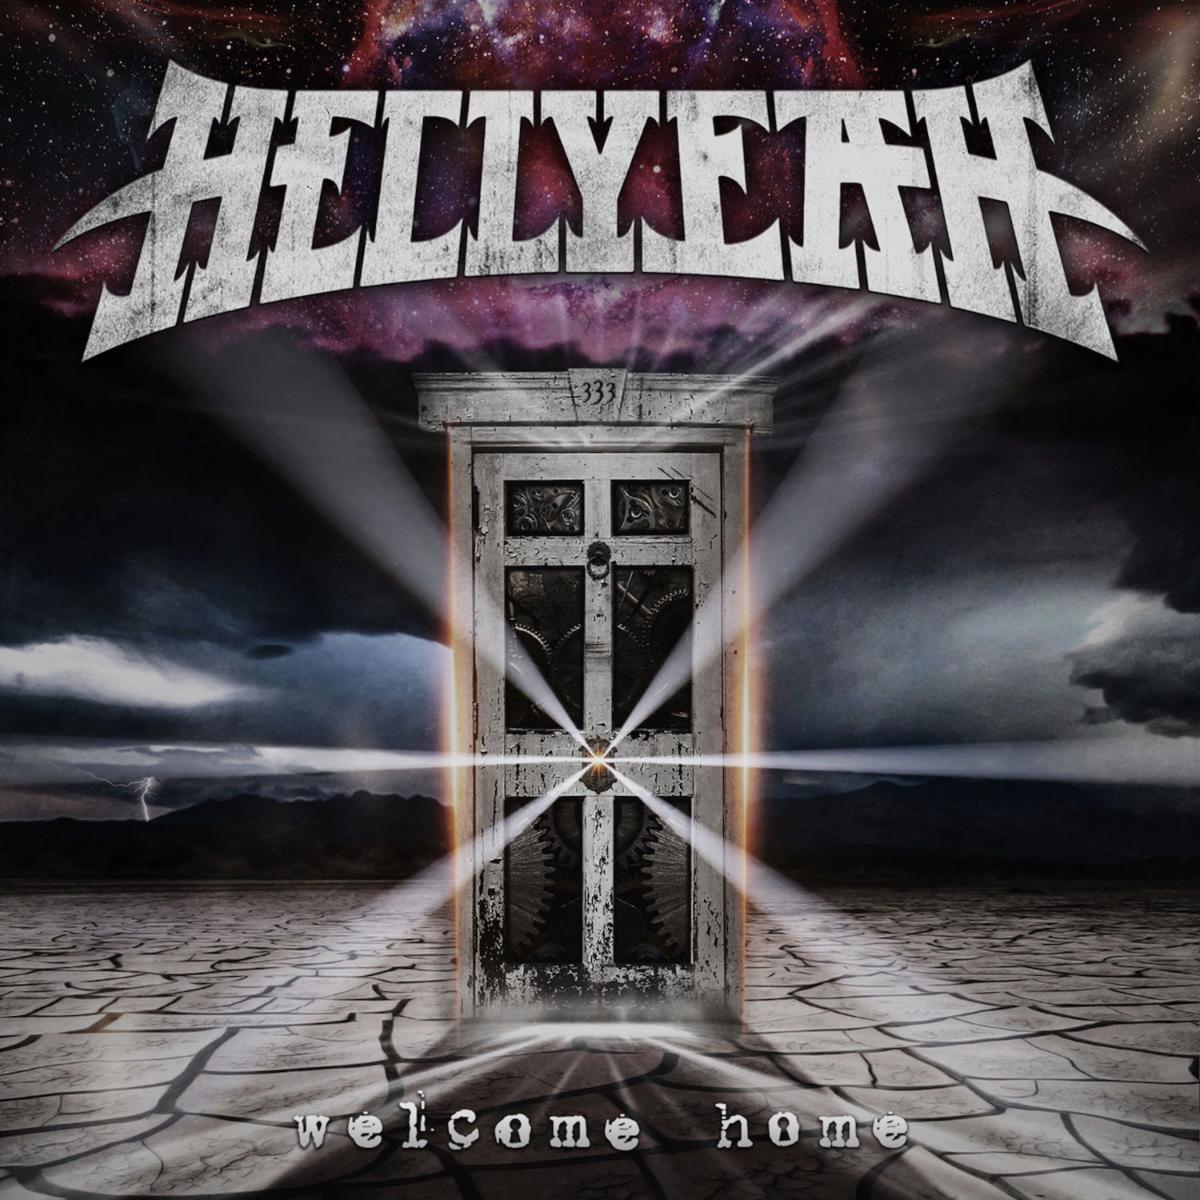 HELLYEAH Adds New Dates To “A Celebration Of Life” Tour; New Track/Audio Video For “Black Flag Army” Available 9/13; New Album, ‘Welcome Home’ Out 9/27 Featuring The Late Vinnie Paul's Final Recordings